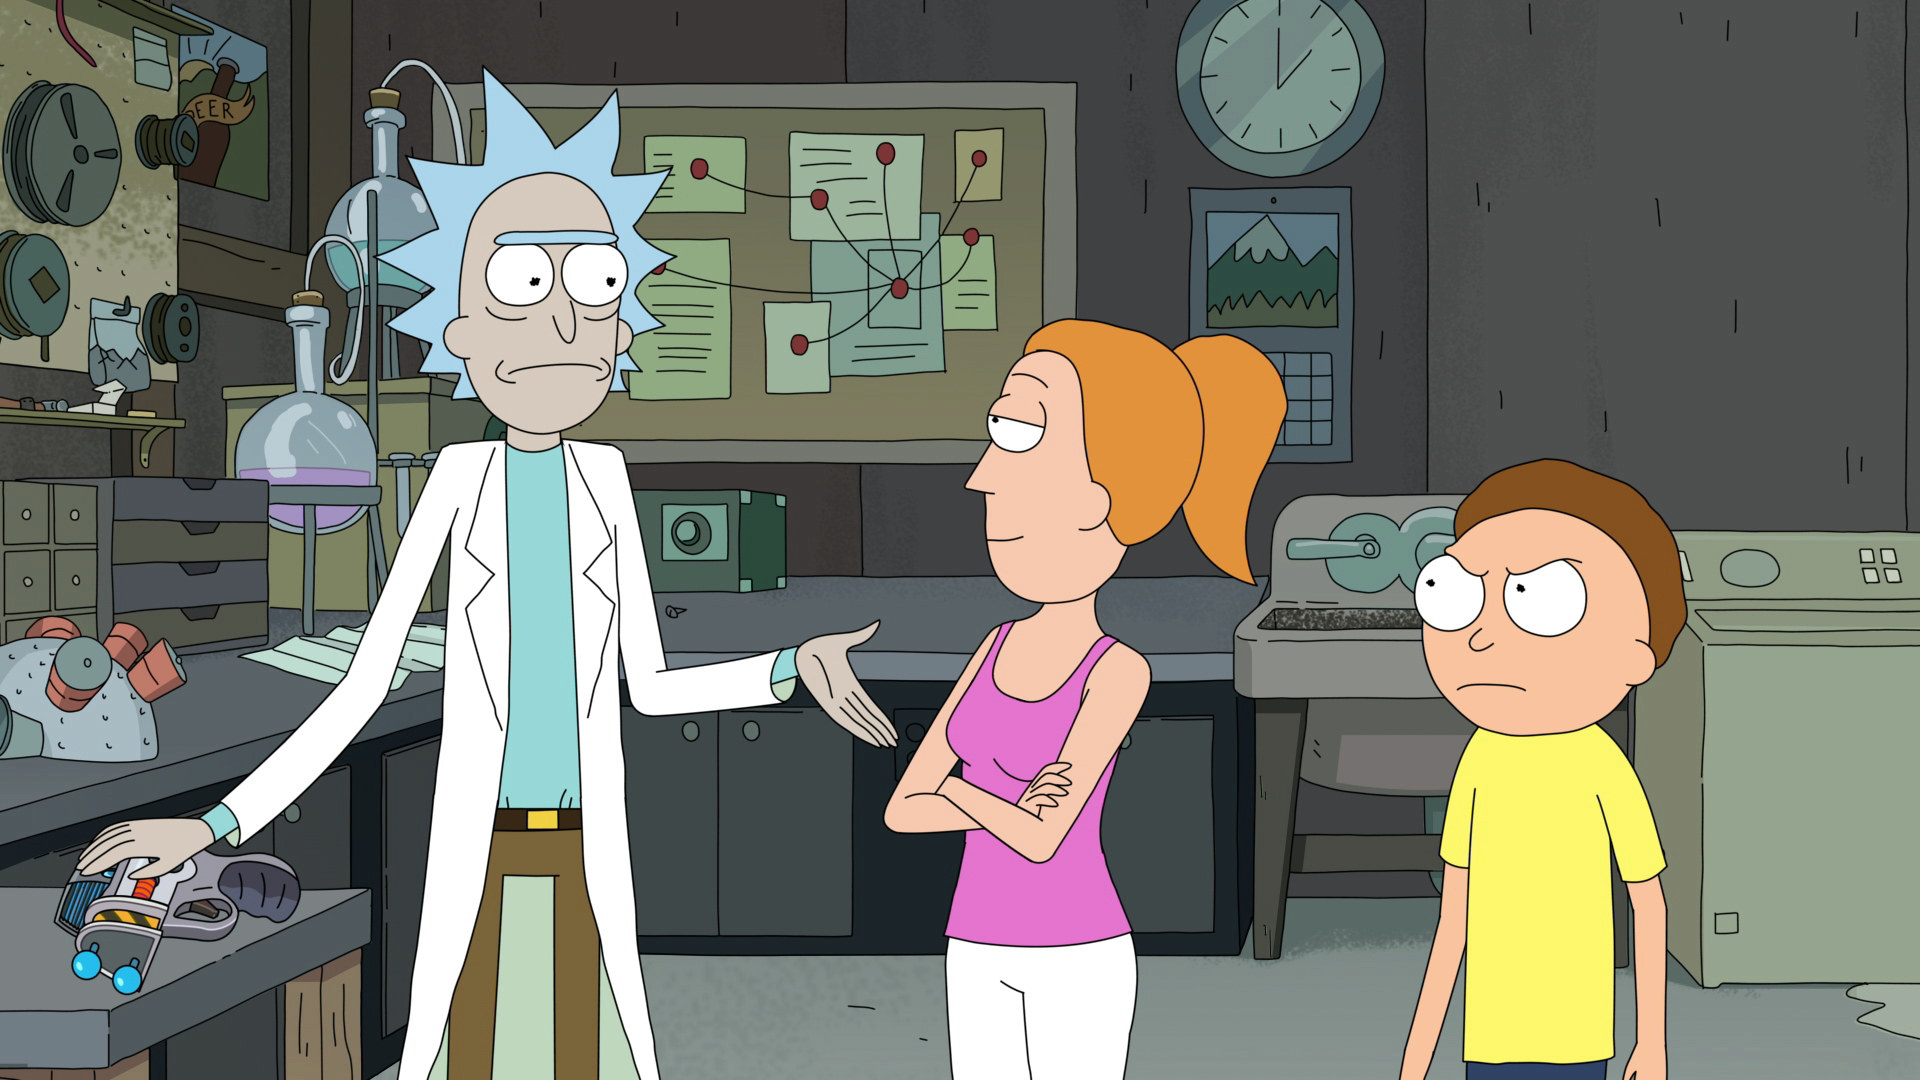 Animated characters Morty, Rick, and Summer standing together